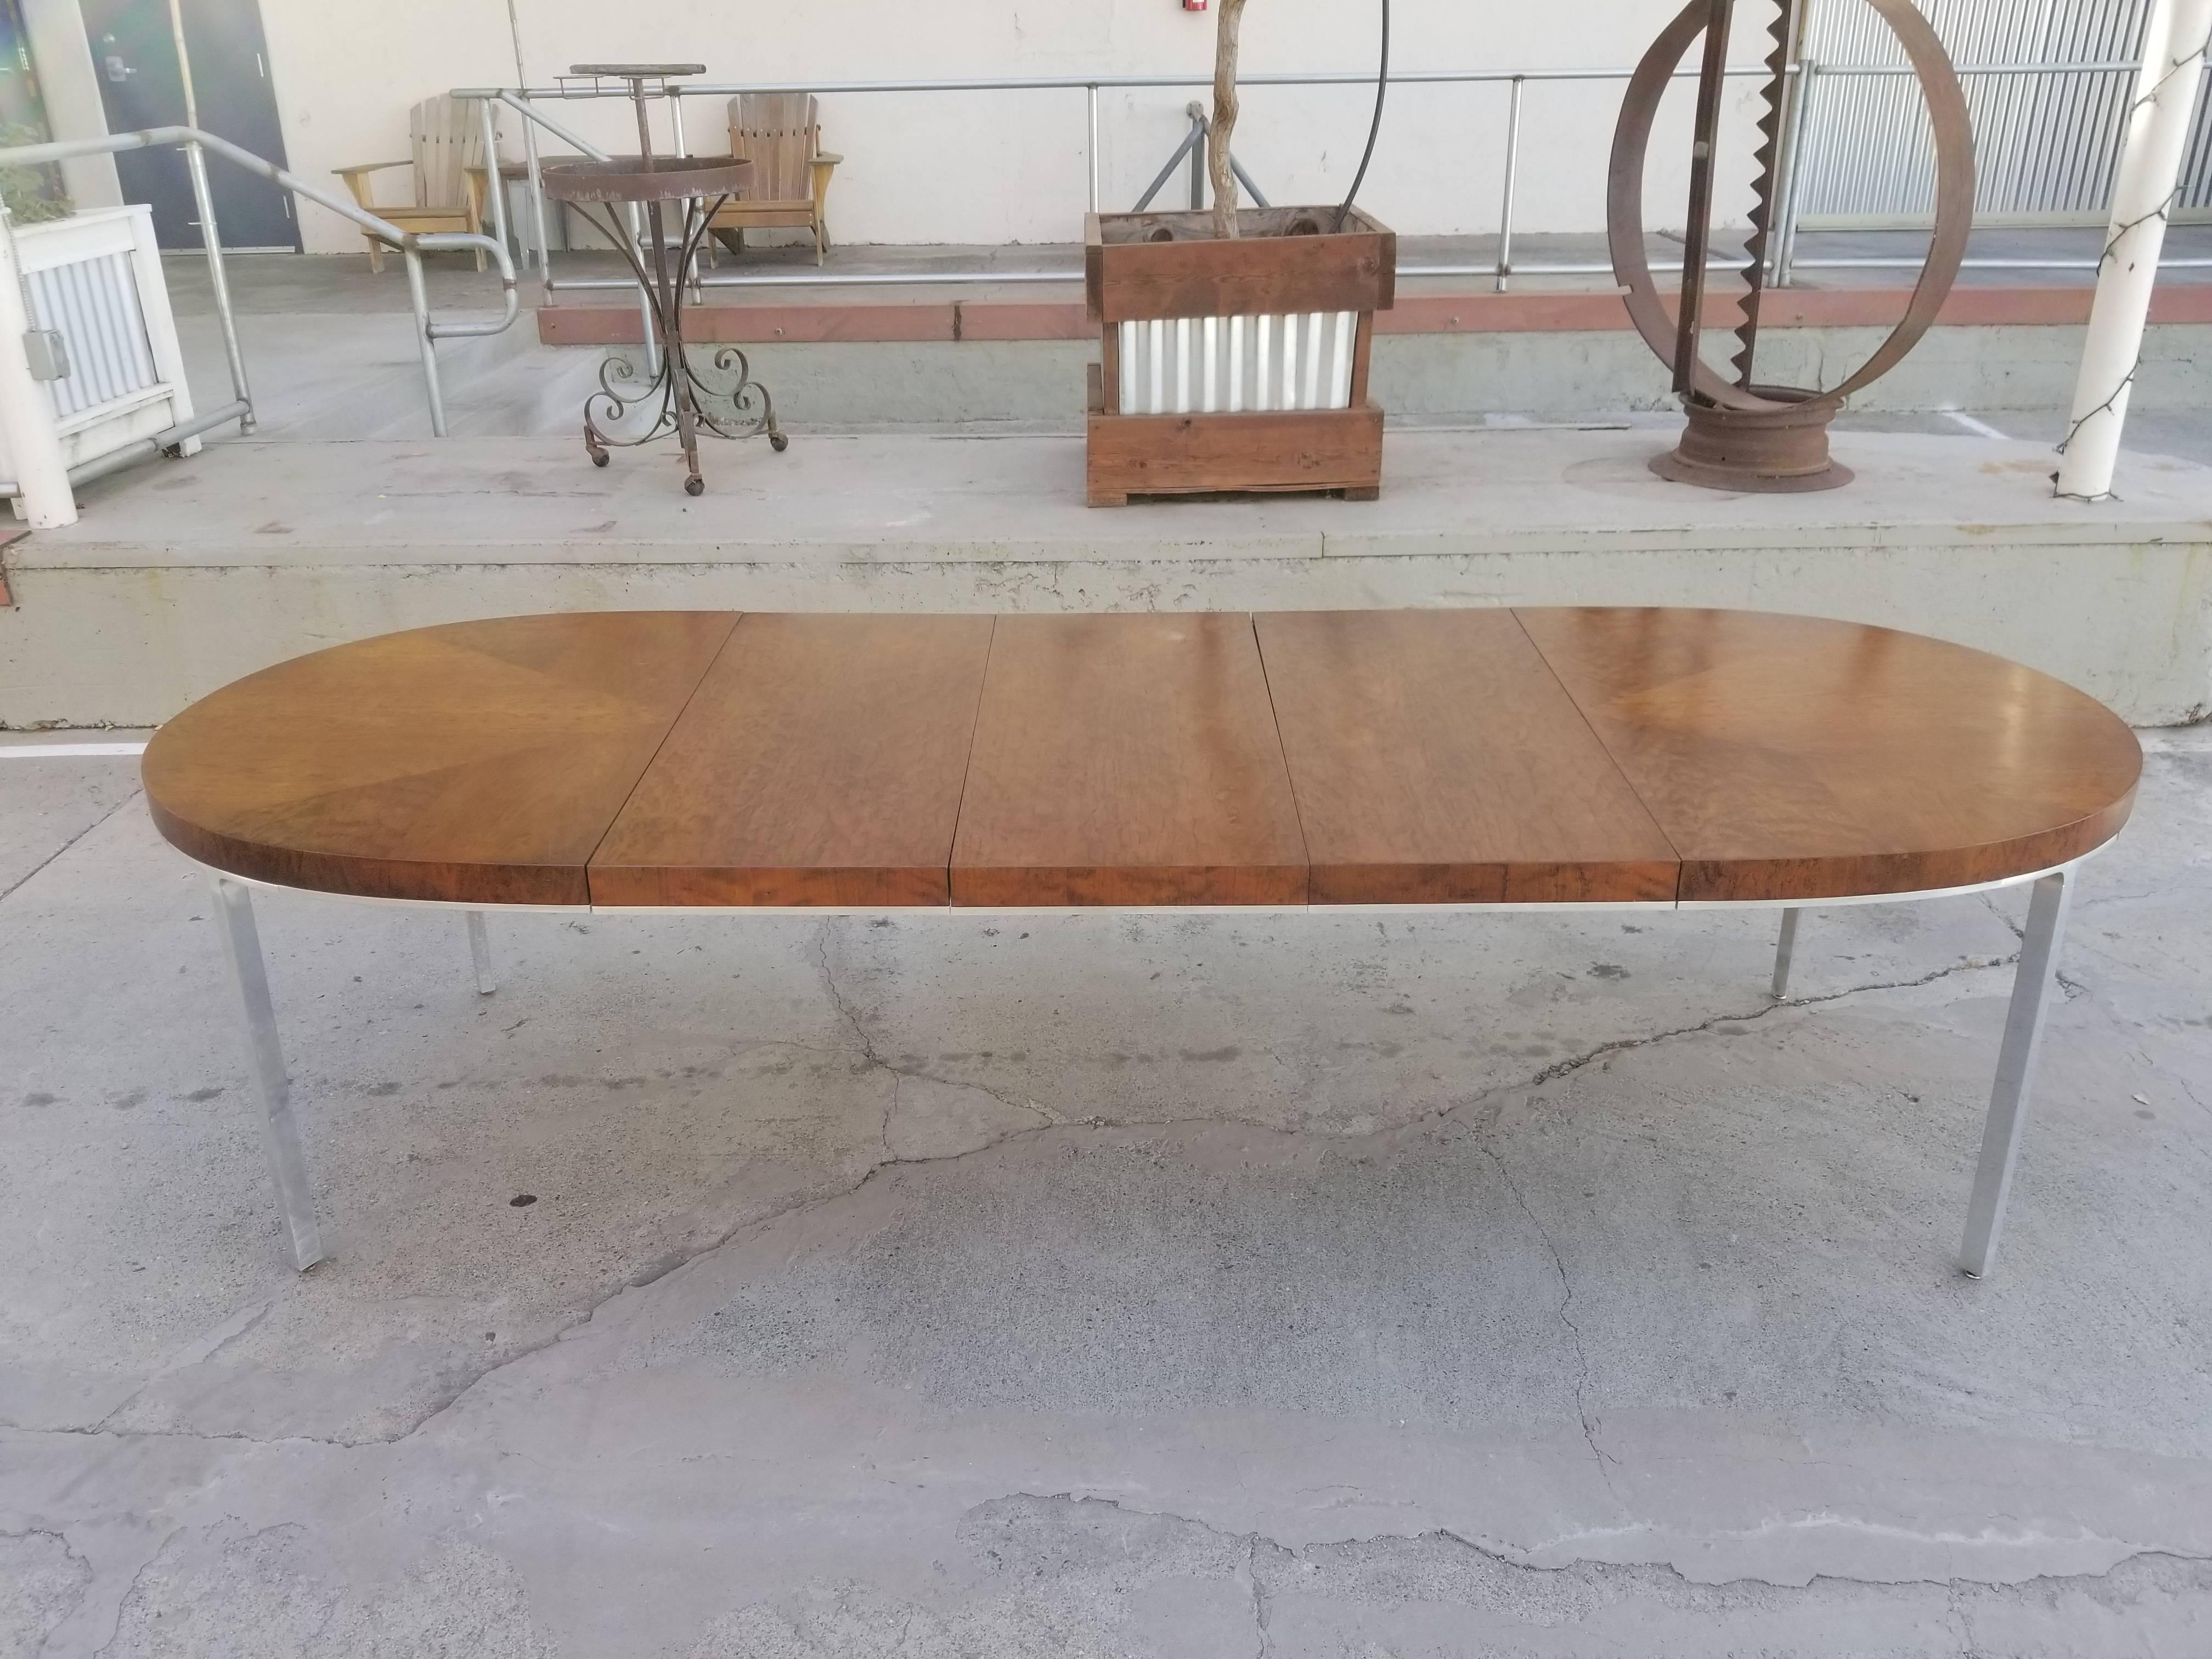 Expanding dining table that would also work well as a conference table. Polished aluminum apron and legs with a book-matched detail to veneer top. Quality construction and materials. Notice beautiful burl wood top surface. Original vintage condition